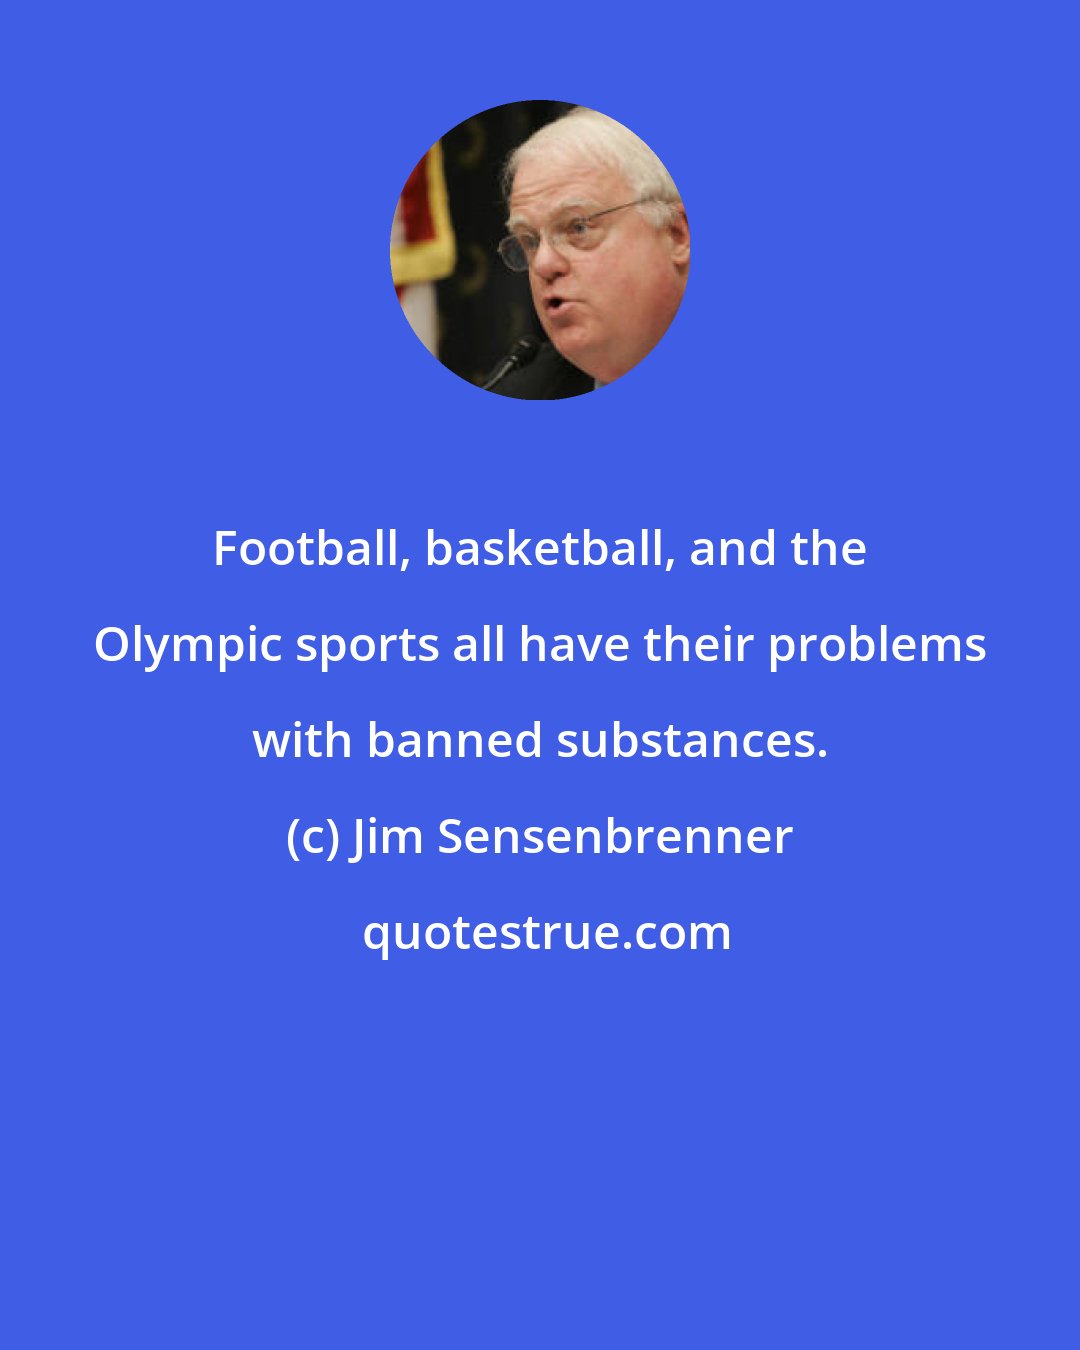 Jim Sensenbrenner: Football, basketball, and the Olympic sports all have their problems with banned substances.